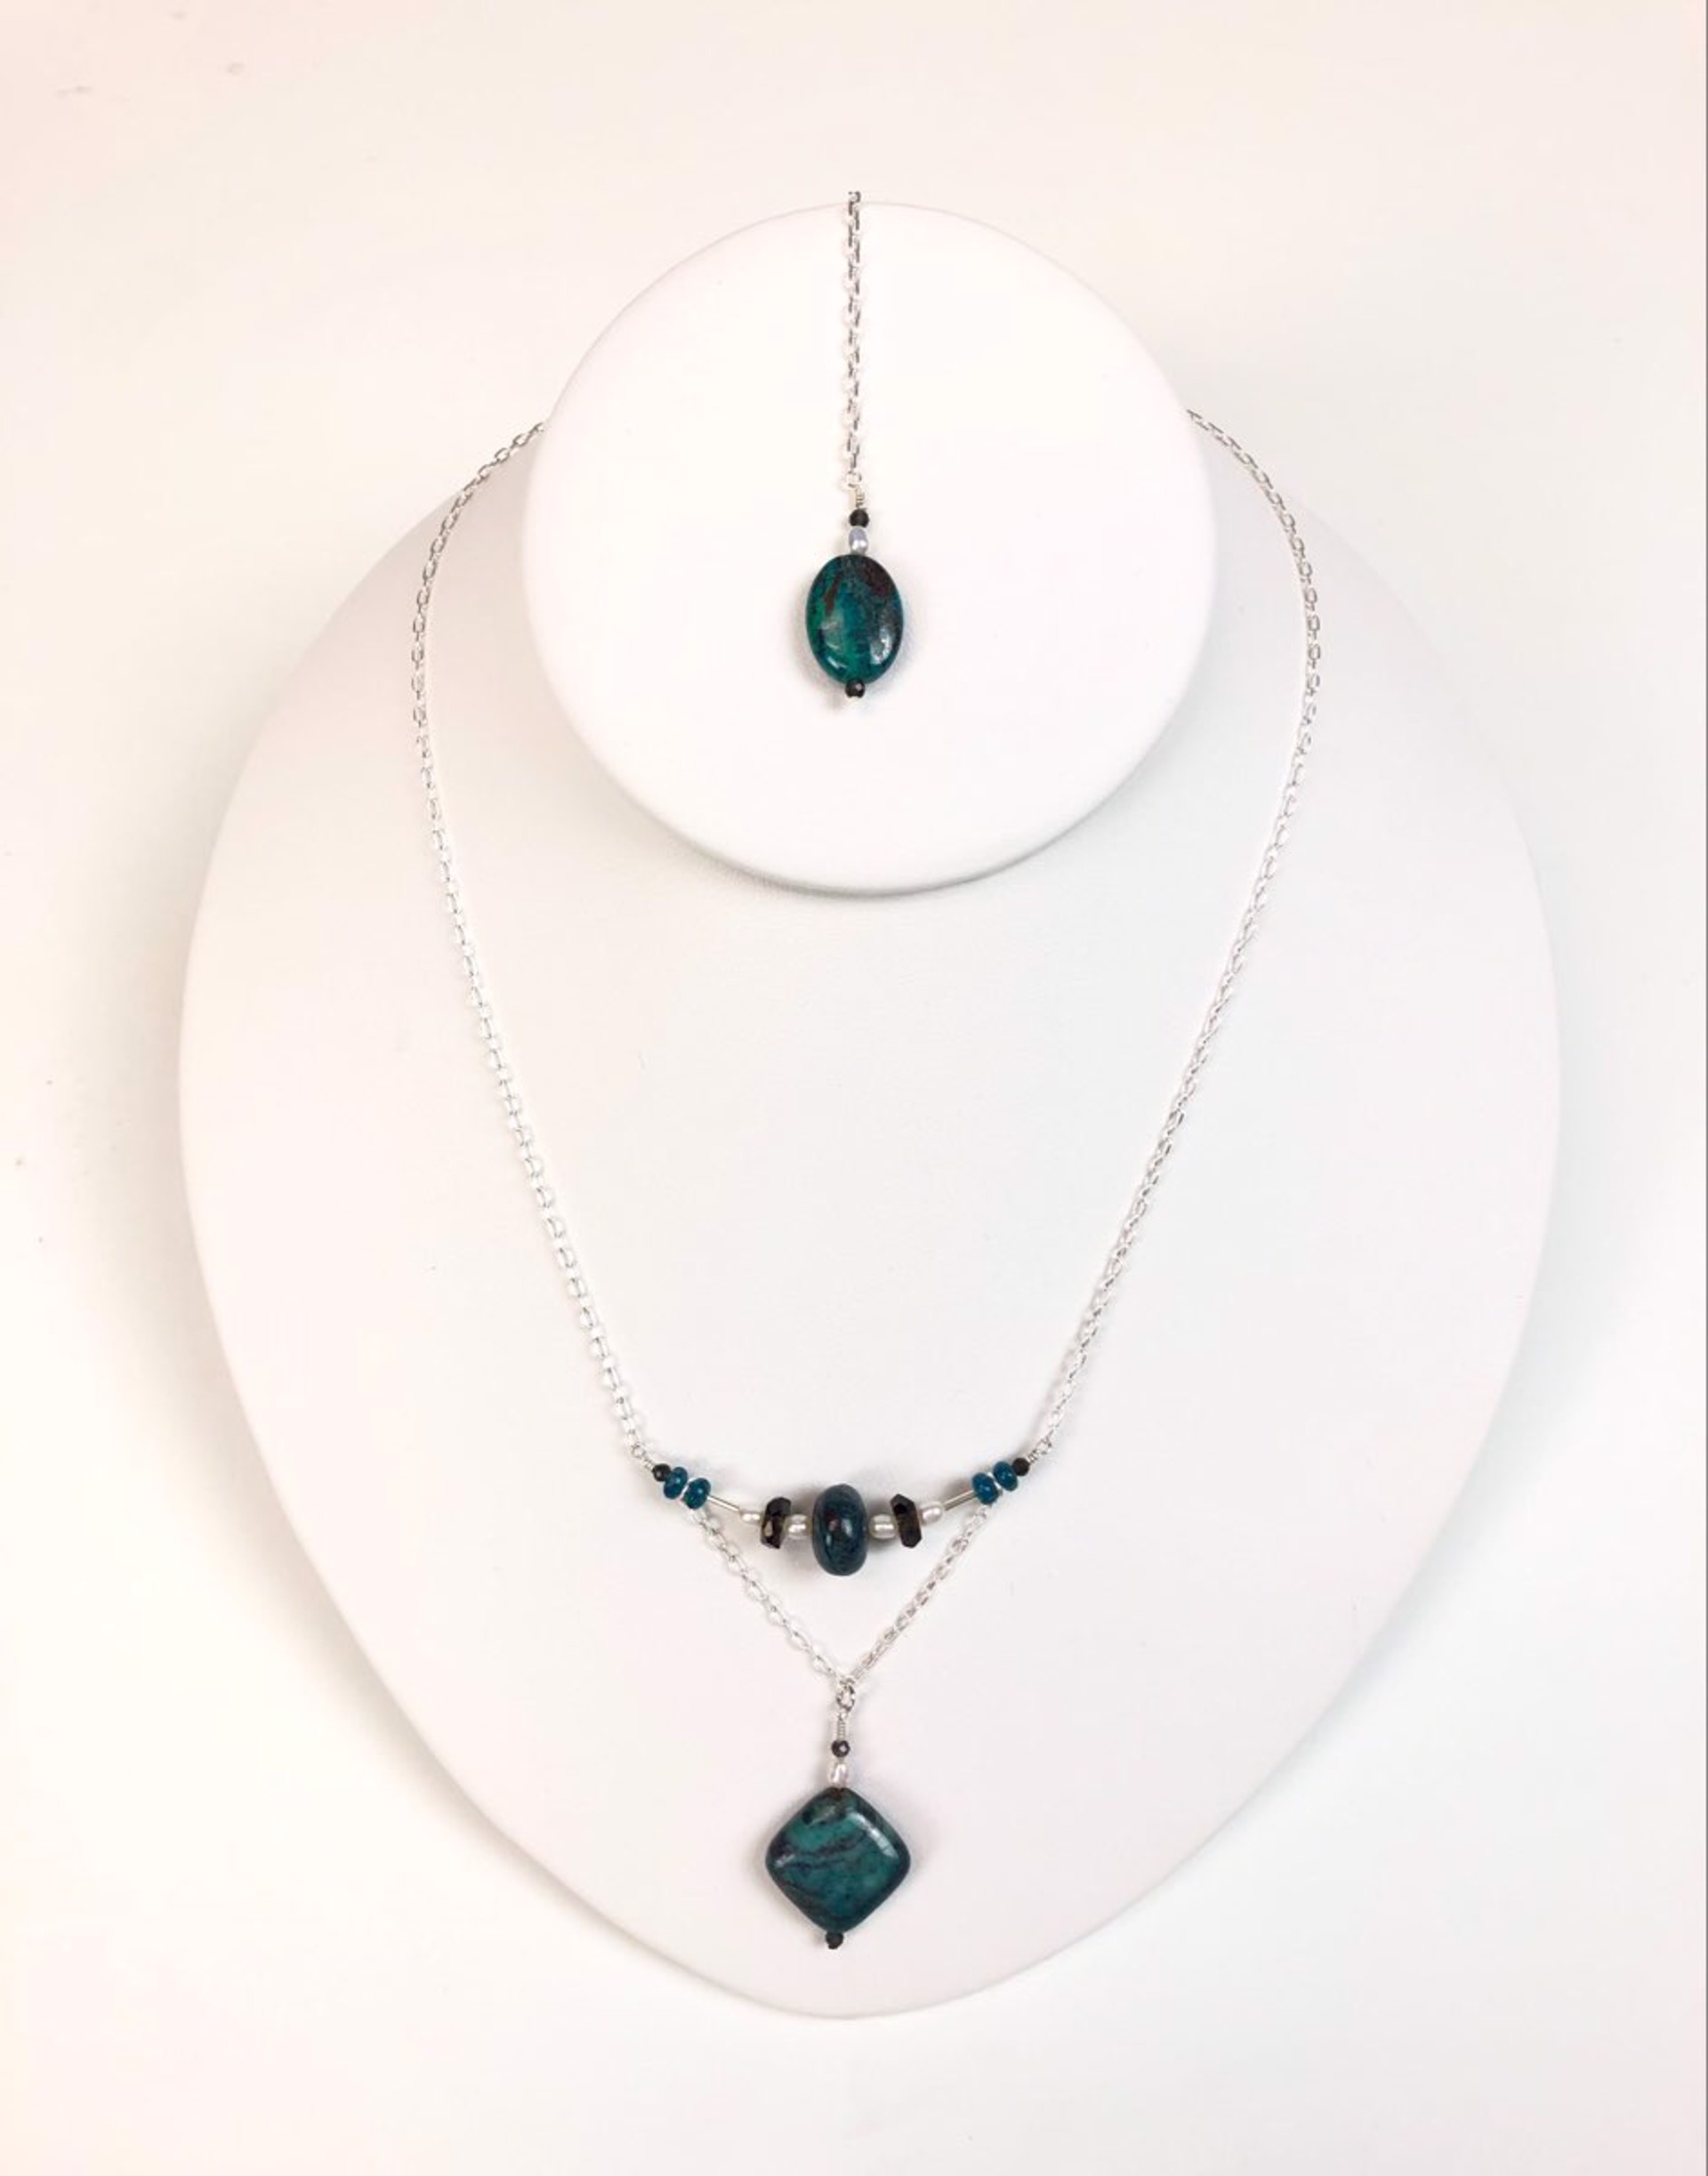 Chrysocolla, Smoky Quartz, Freshwater Pearls, Neon Apatite, and Sterling Silver Chain Necklace Infinity Pendant Set by Lisa Kelley